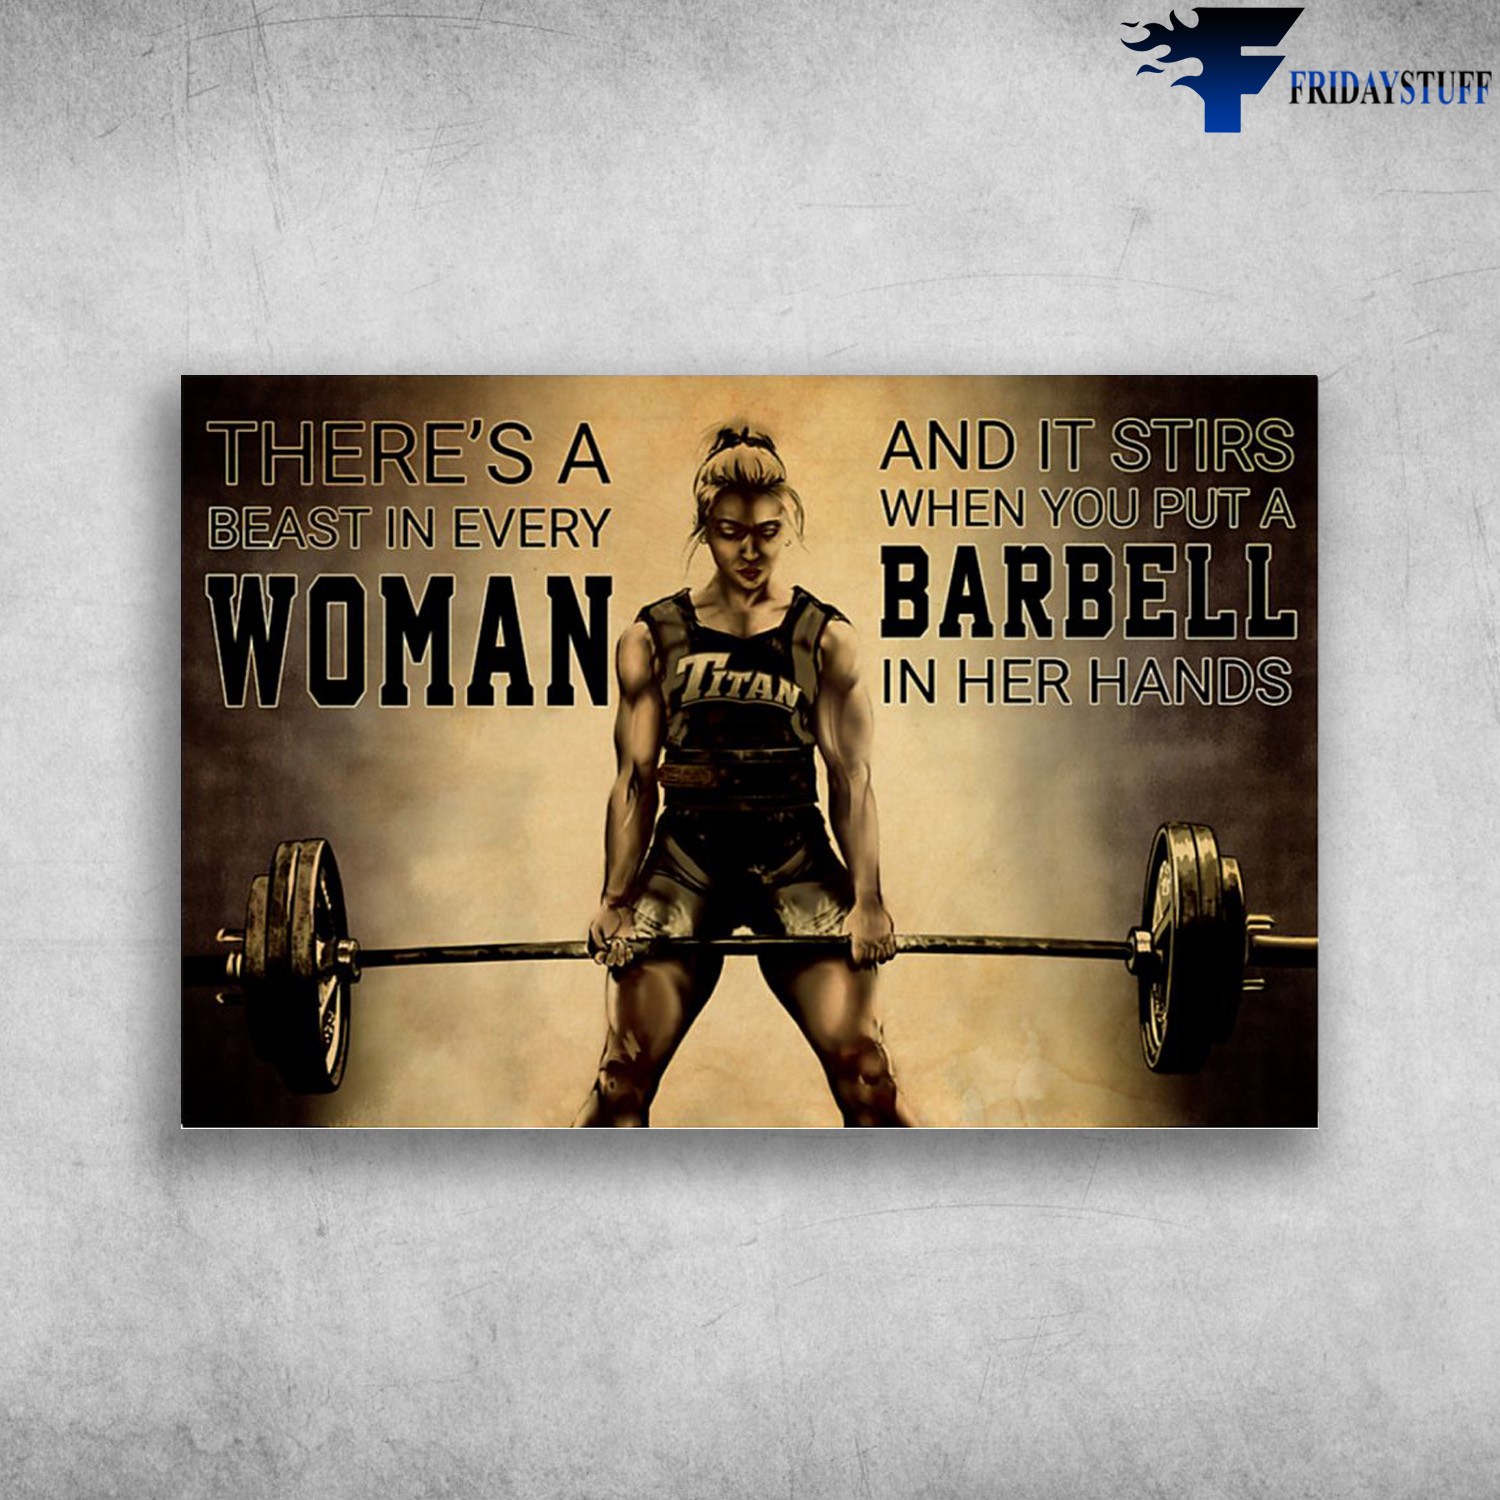 The Girl Lifting Weights - There's A Beast In Every Woman, And It Stirs When You Put A Barbell In Her Hands